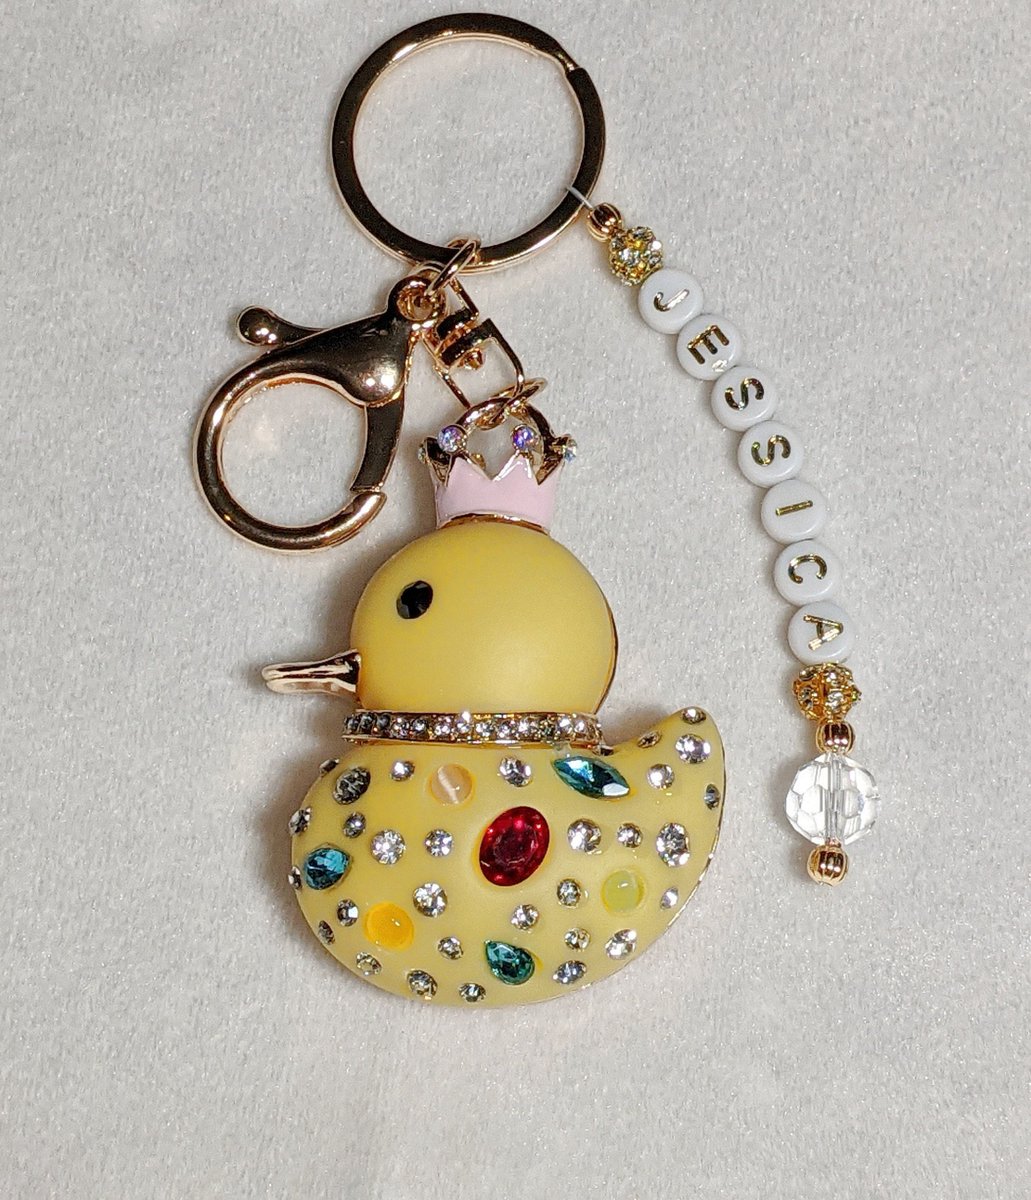 Thanks for the great review Emily ★★★★★! etsy.me/3RbmX2z #etsy #yellow #gold #keychainyellowduck #blingkeychain #caraccessory #crownjewelry #cuteyellowducky #keyring #keyringgiftwomen